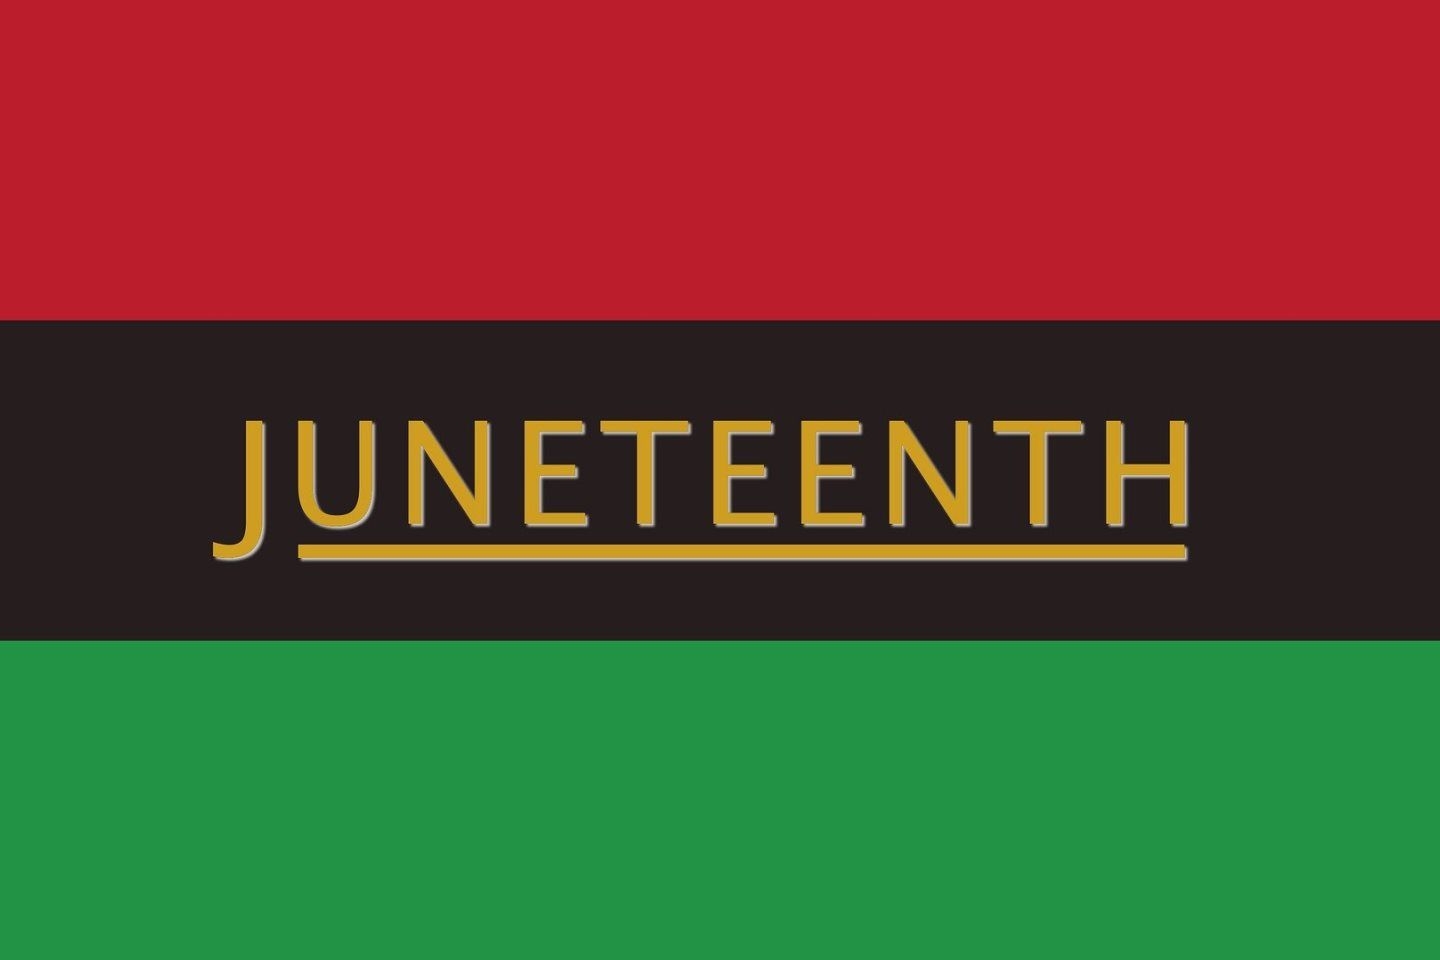 Juneteenth Banners free from Pixabay.com